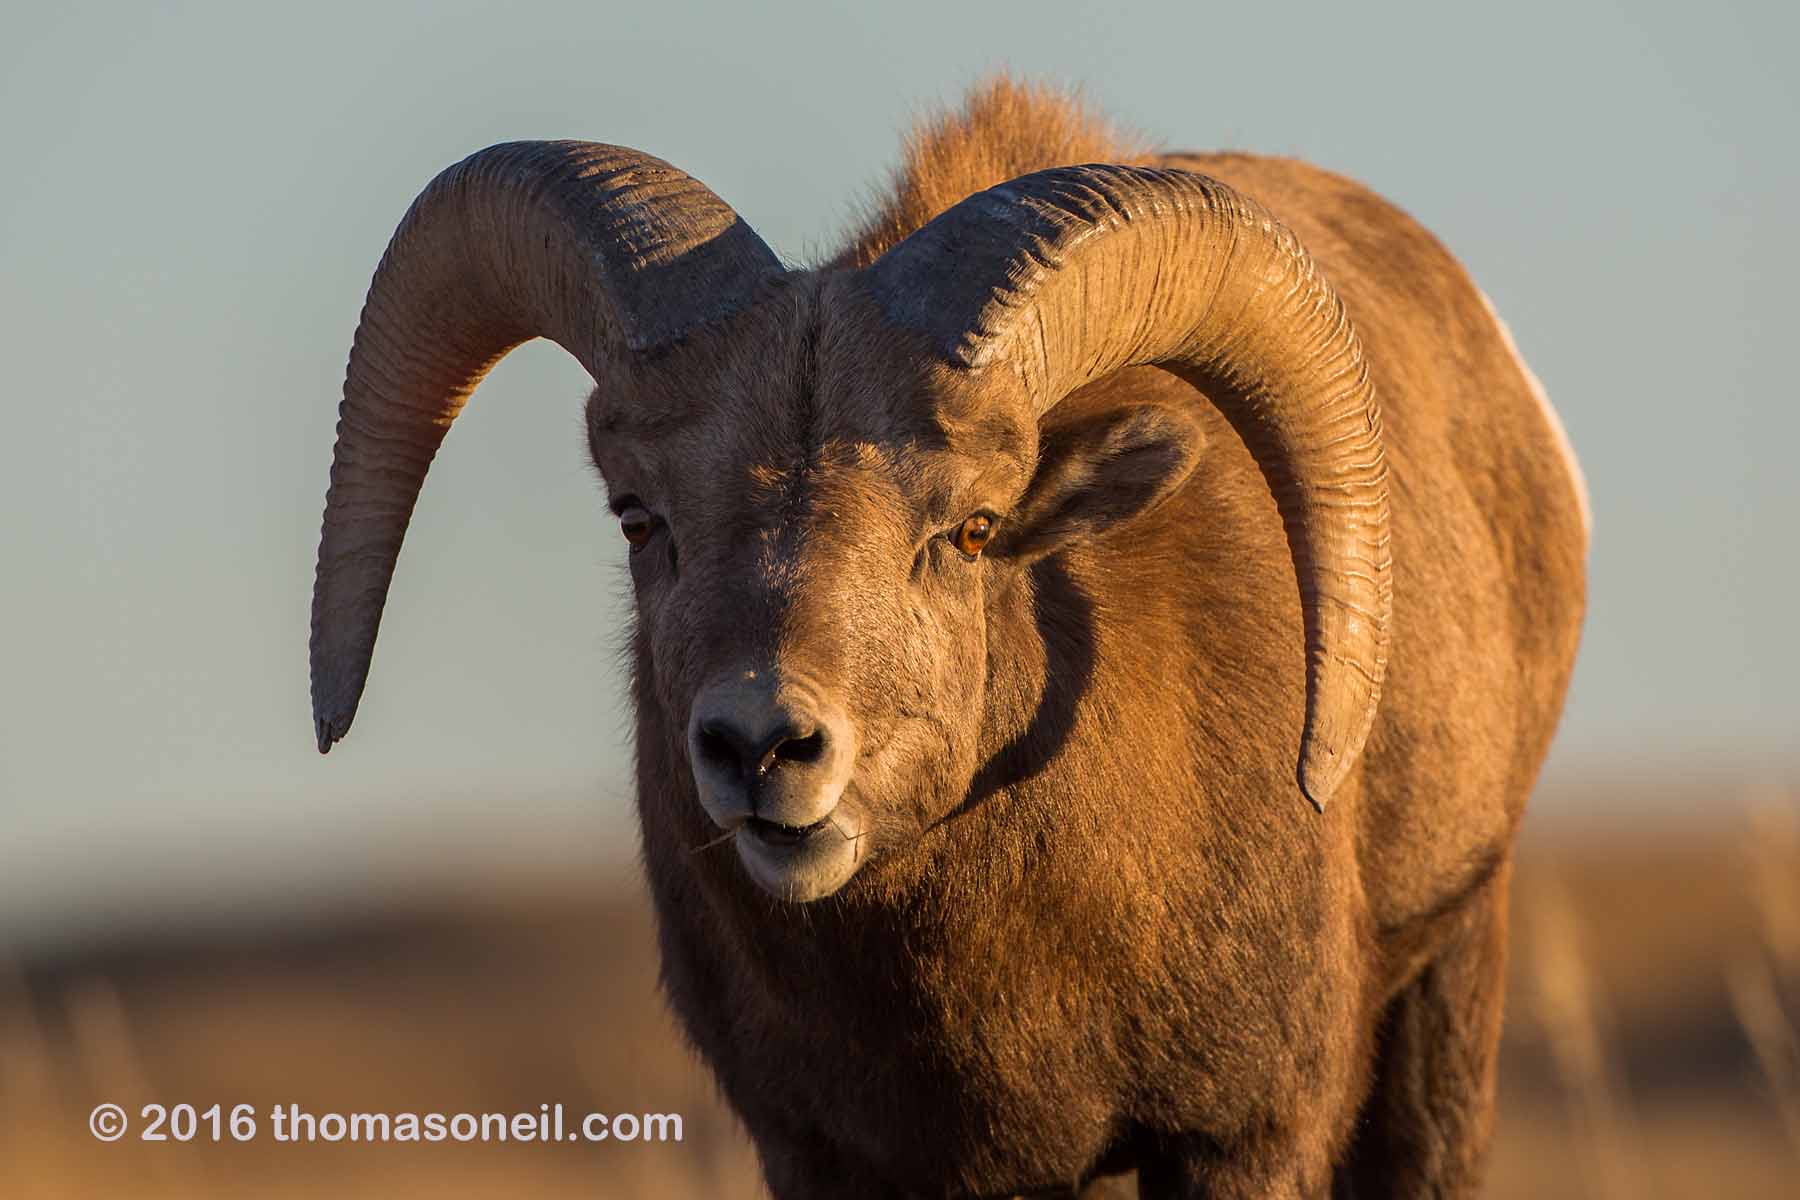 Bighorn with a wild look in his eye (see next image), Badlands National Park, 2016.  Click for next photo.